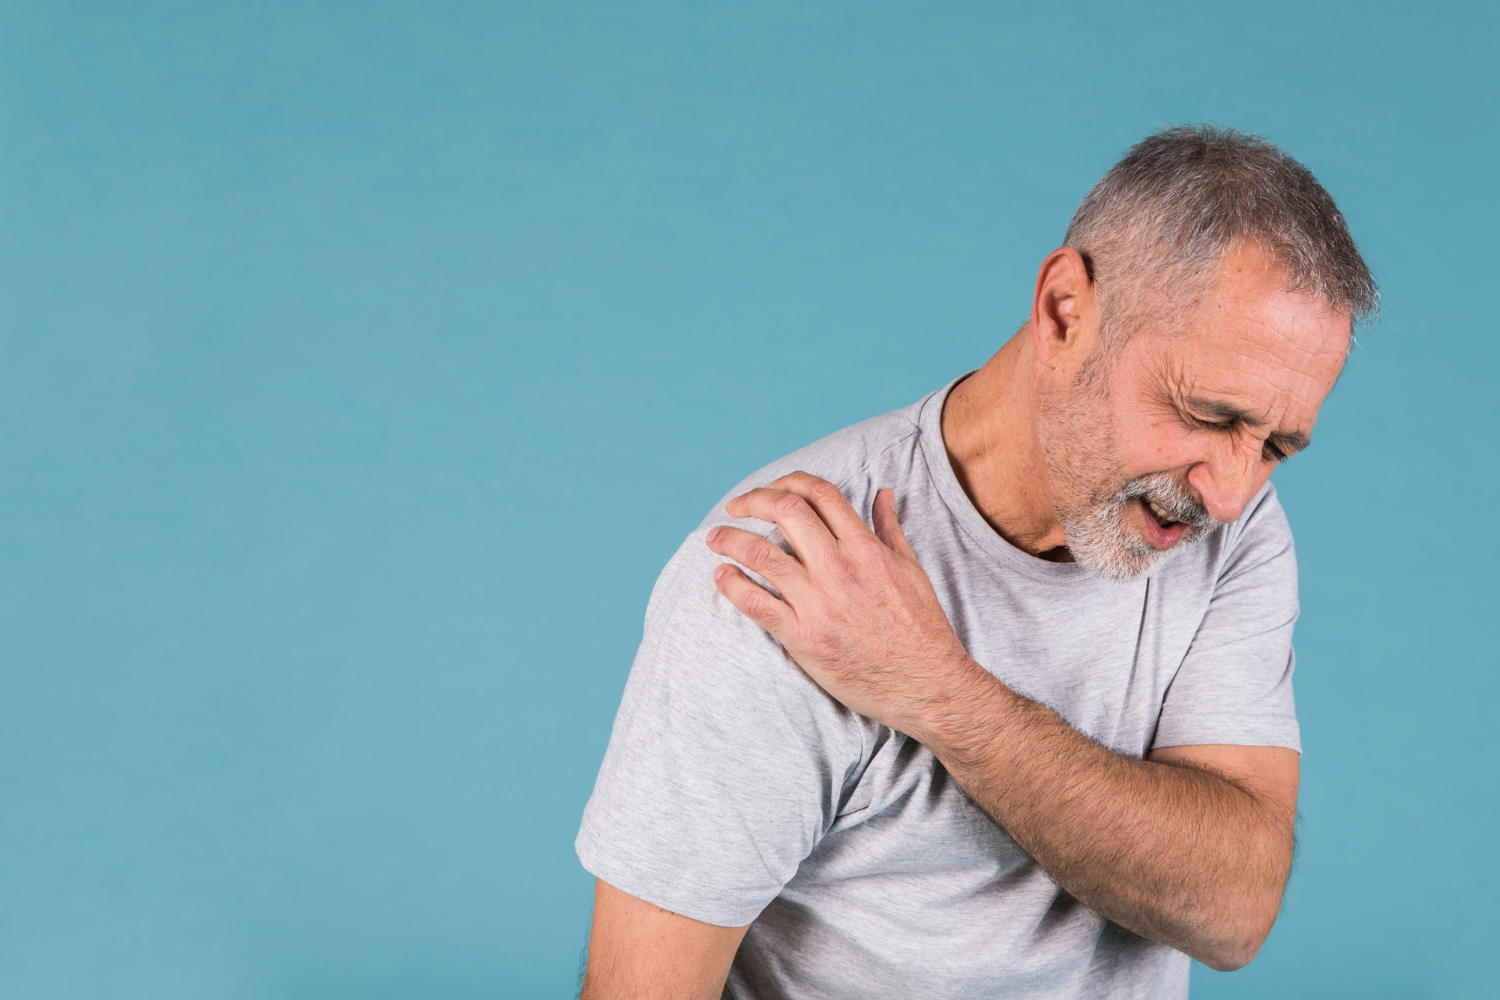 Seeking Justice for Your Pain: How to File a Shoulder Impingement Claim in San Antonio 33